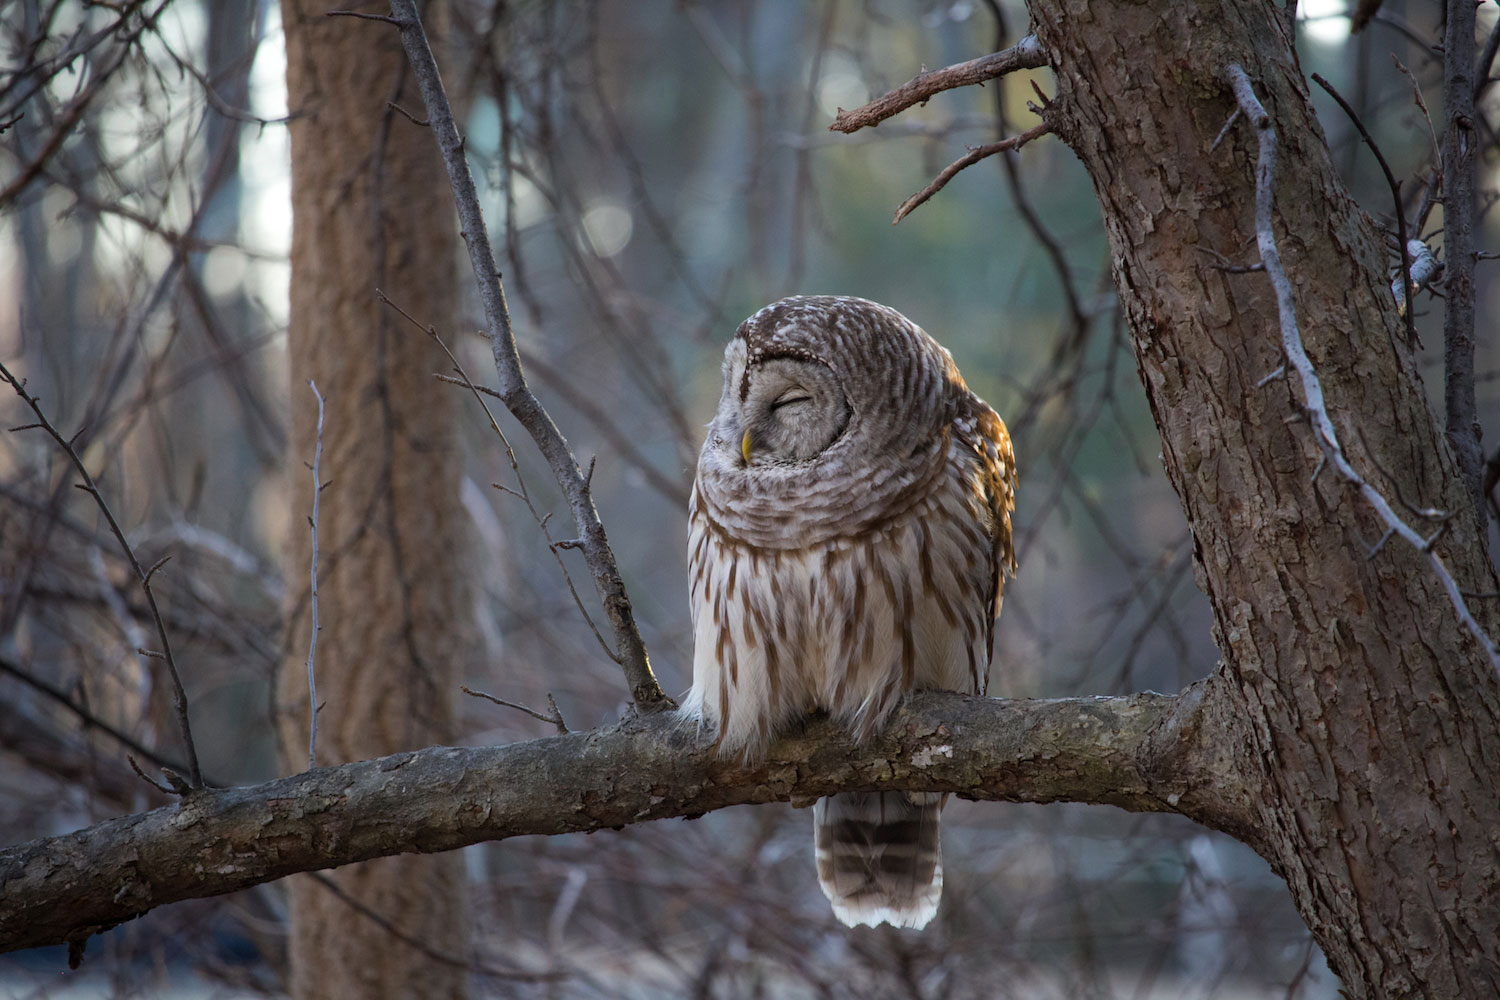 A barred owl sleeping on a tree branch.